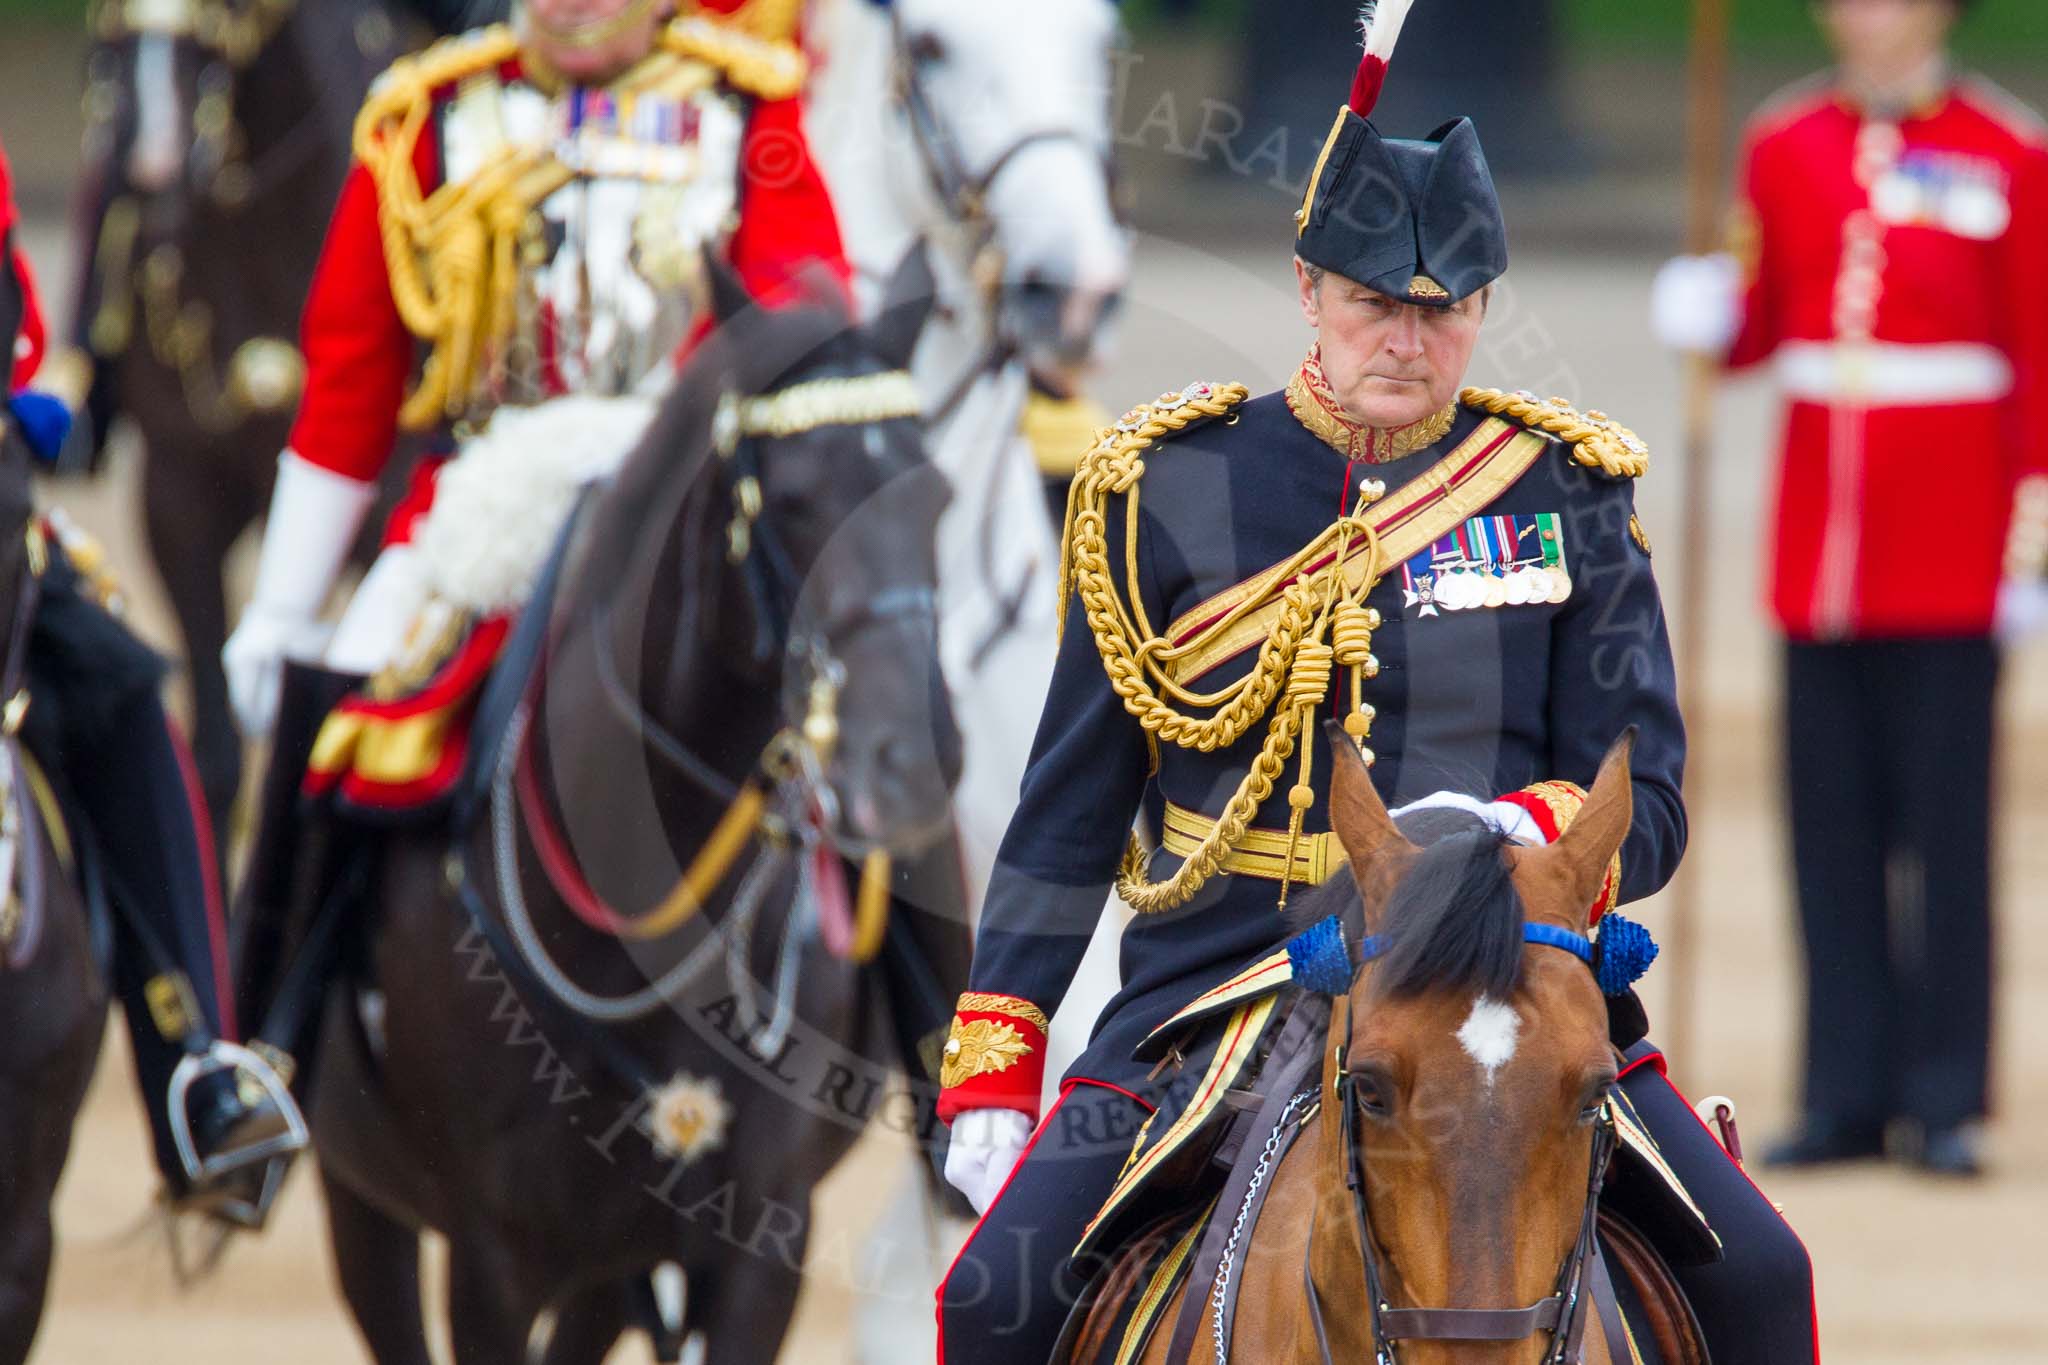 Trooping the Colour 2014.
Horse Guards Parade, Westminster,
London SW1A,

United Kingdom,
on 14 June 2014 at 11:07, image #432